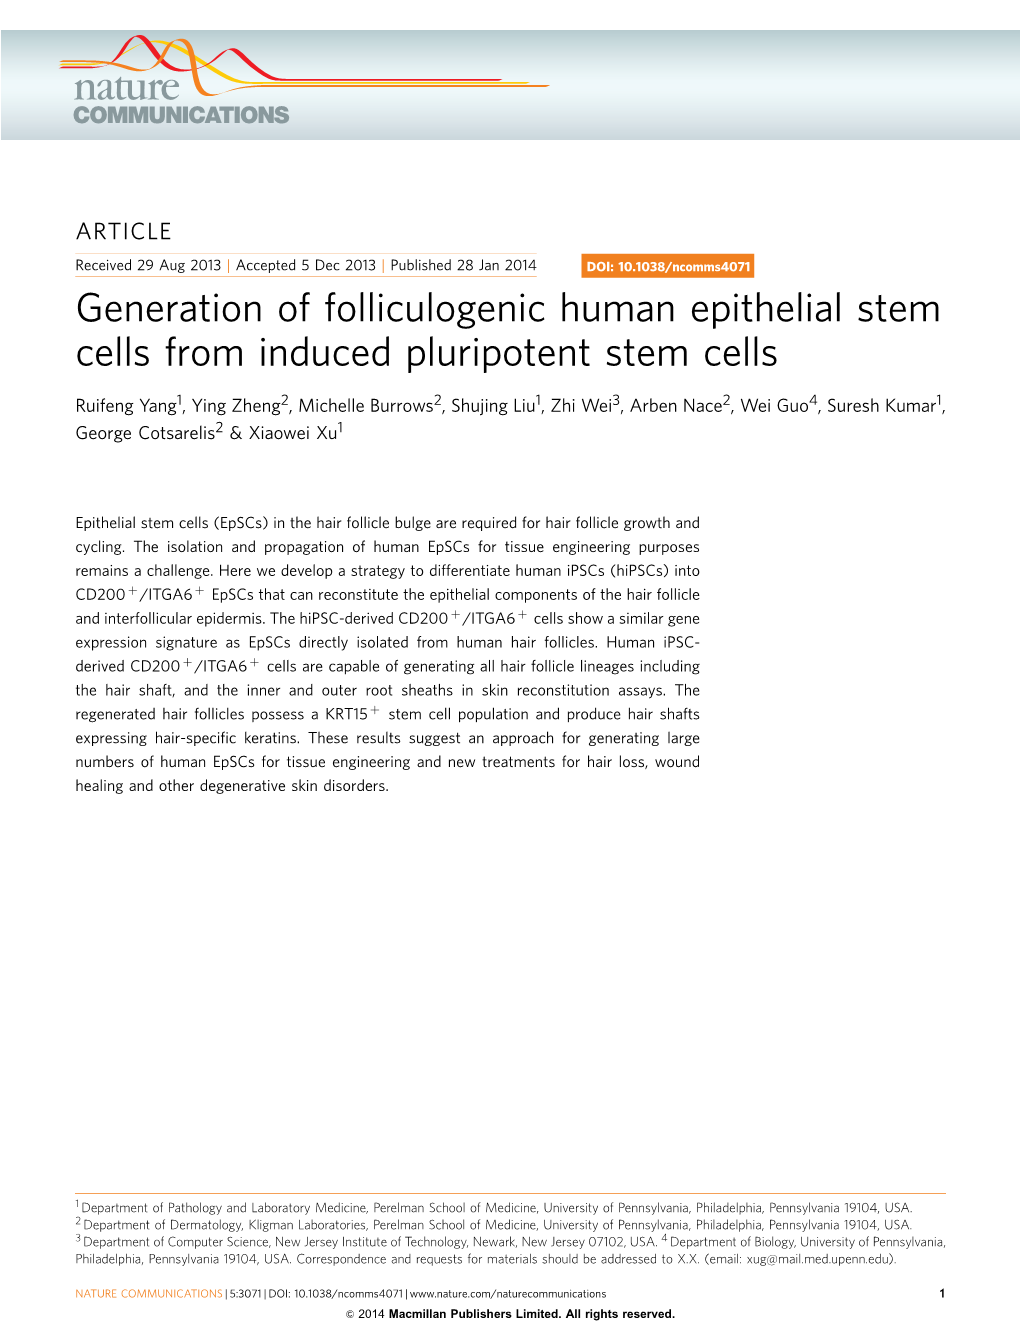 Generation of Folliculogenic Human Epithelial Stem Cells from Induced Pluripotent Stem Cells